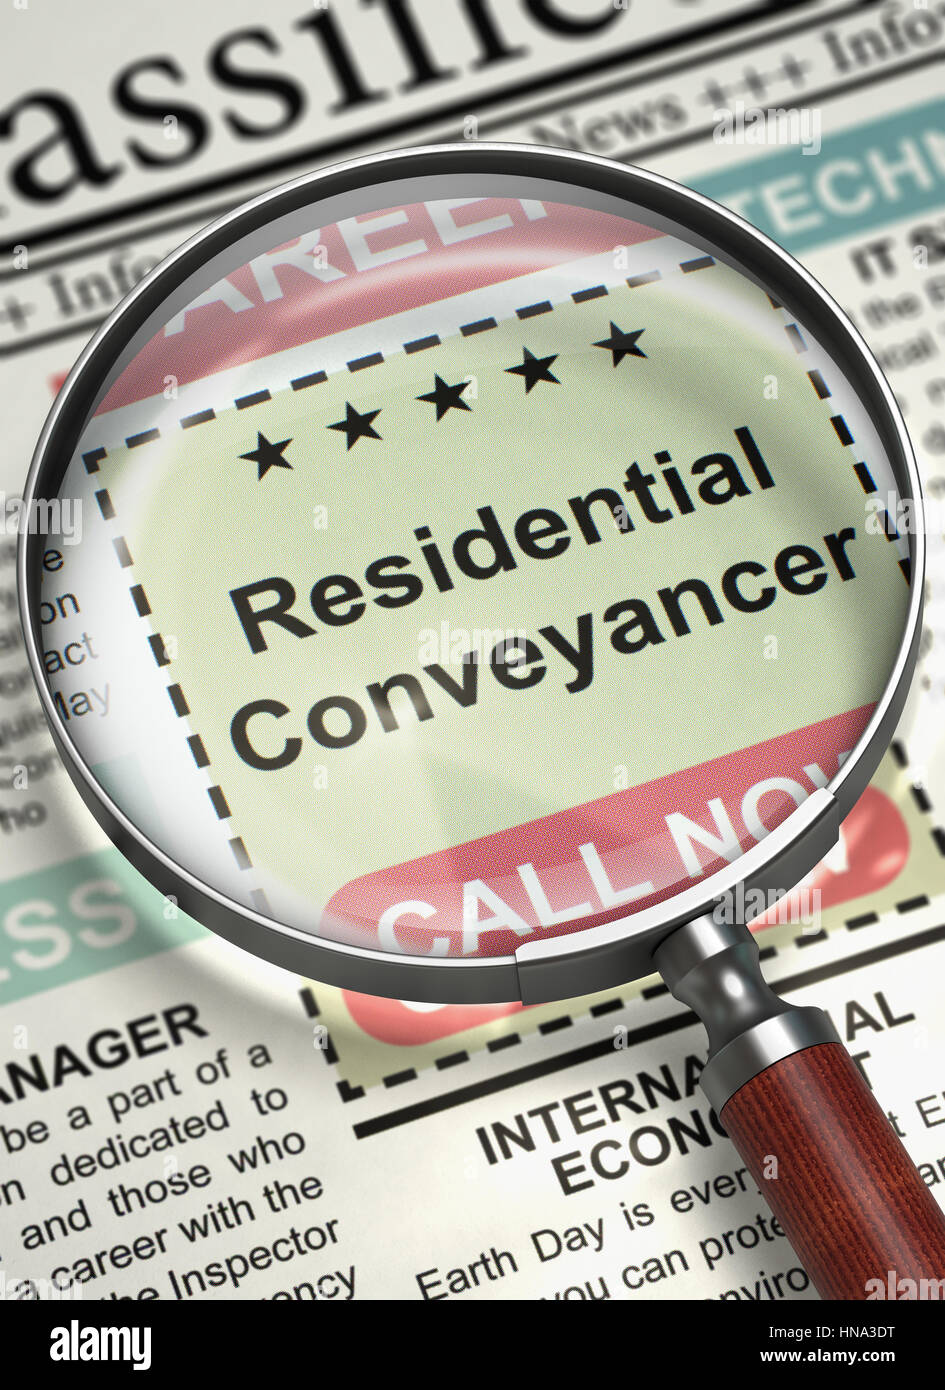 Residential Conveyancer Join Our Team. 3D. Stock Photo